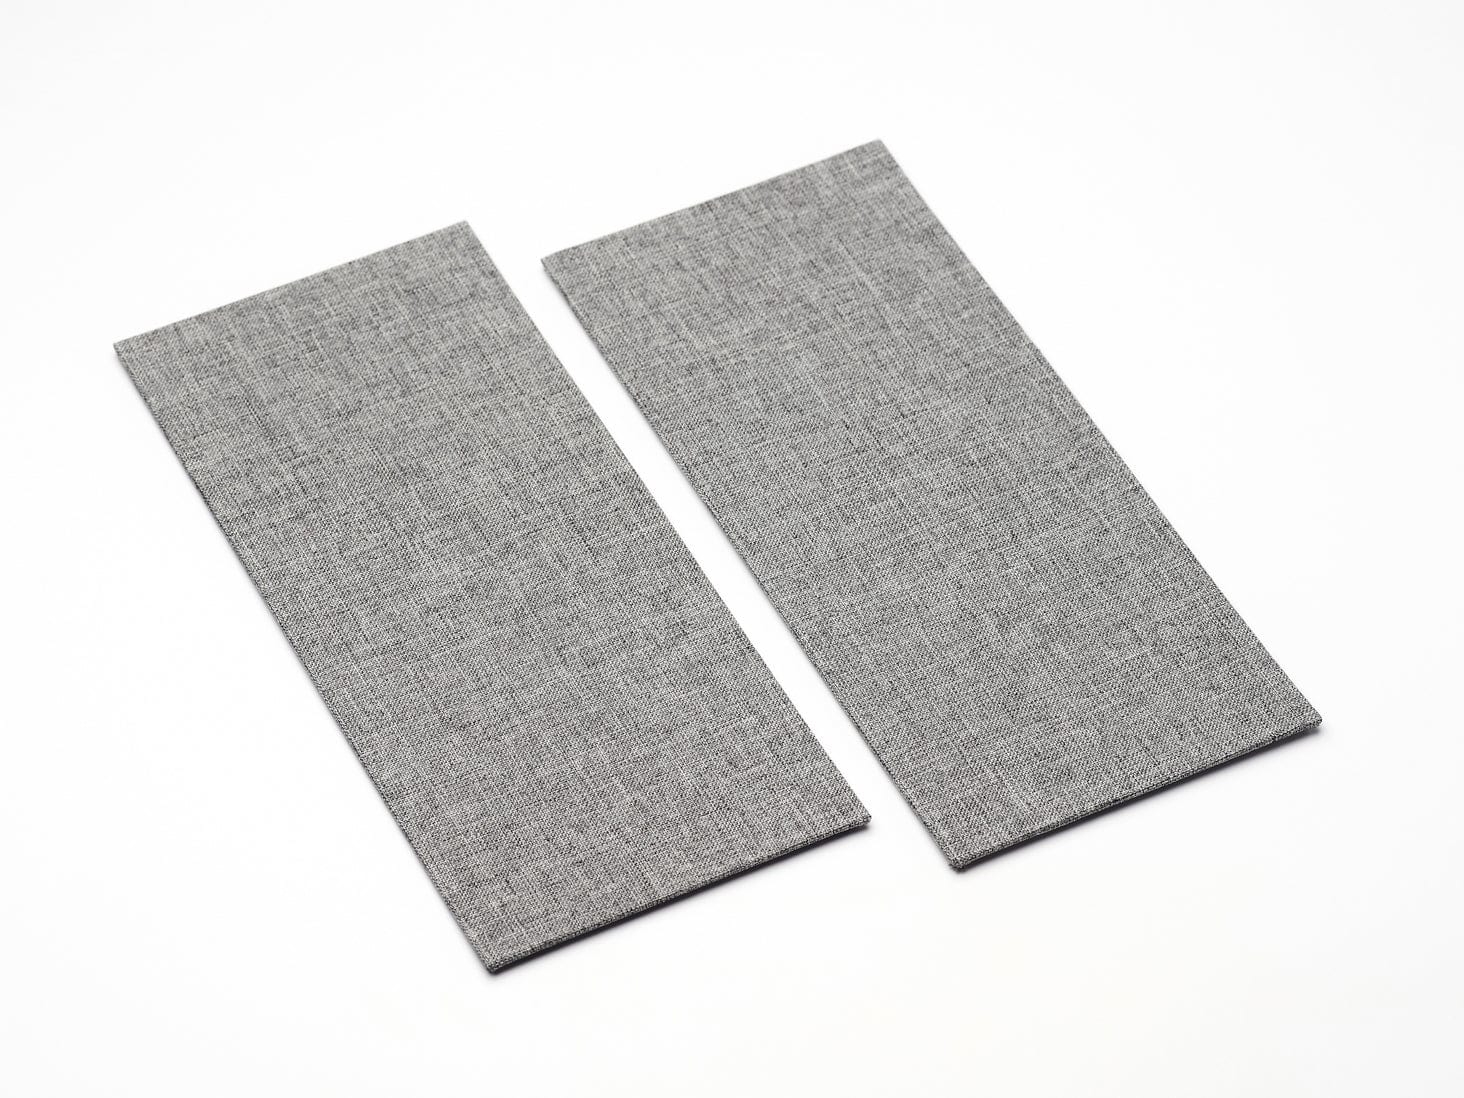 Sample Grey Linen FAB Sides® for A4 Deep Gift Boxes